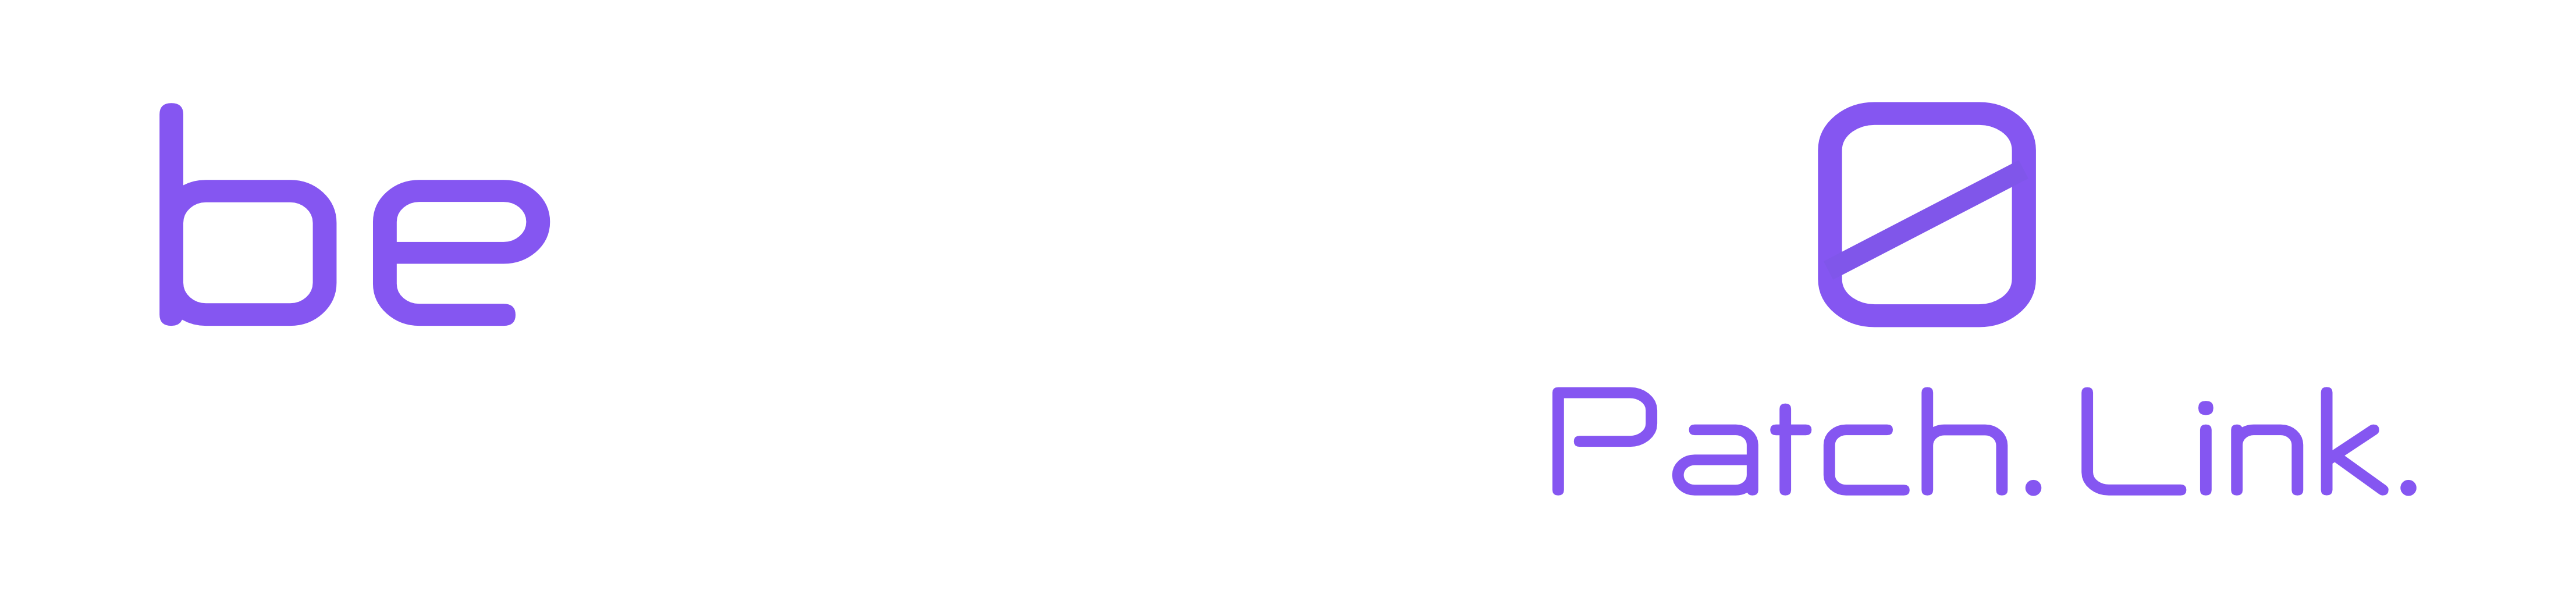 Cyboro logo. Text: be Cyboro with violett accent color. The emblem is a zero in the font of a development environment. The claim is: Patch. Link.